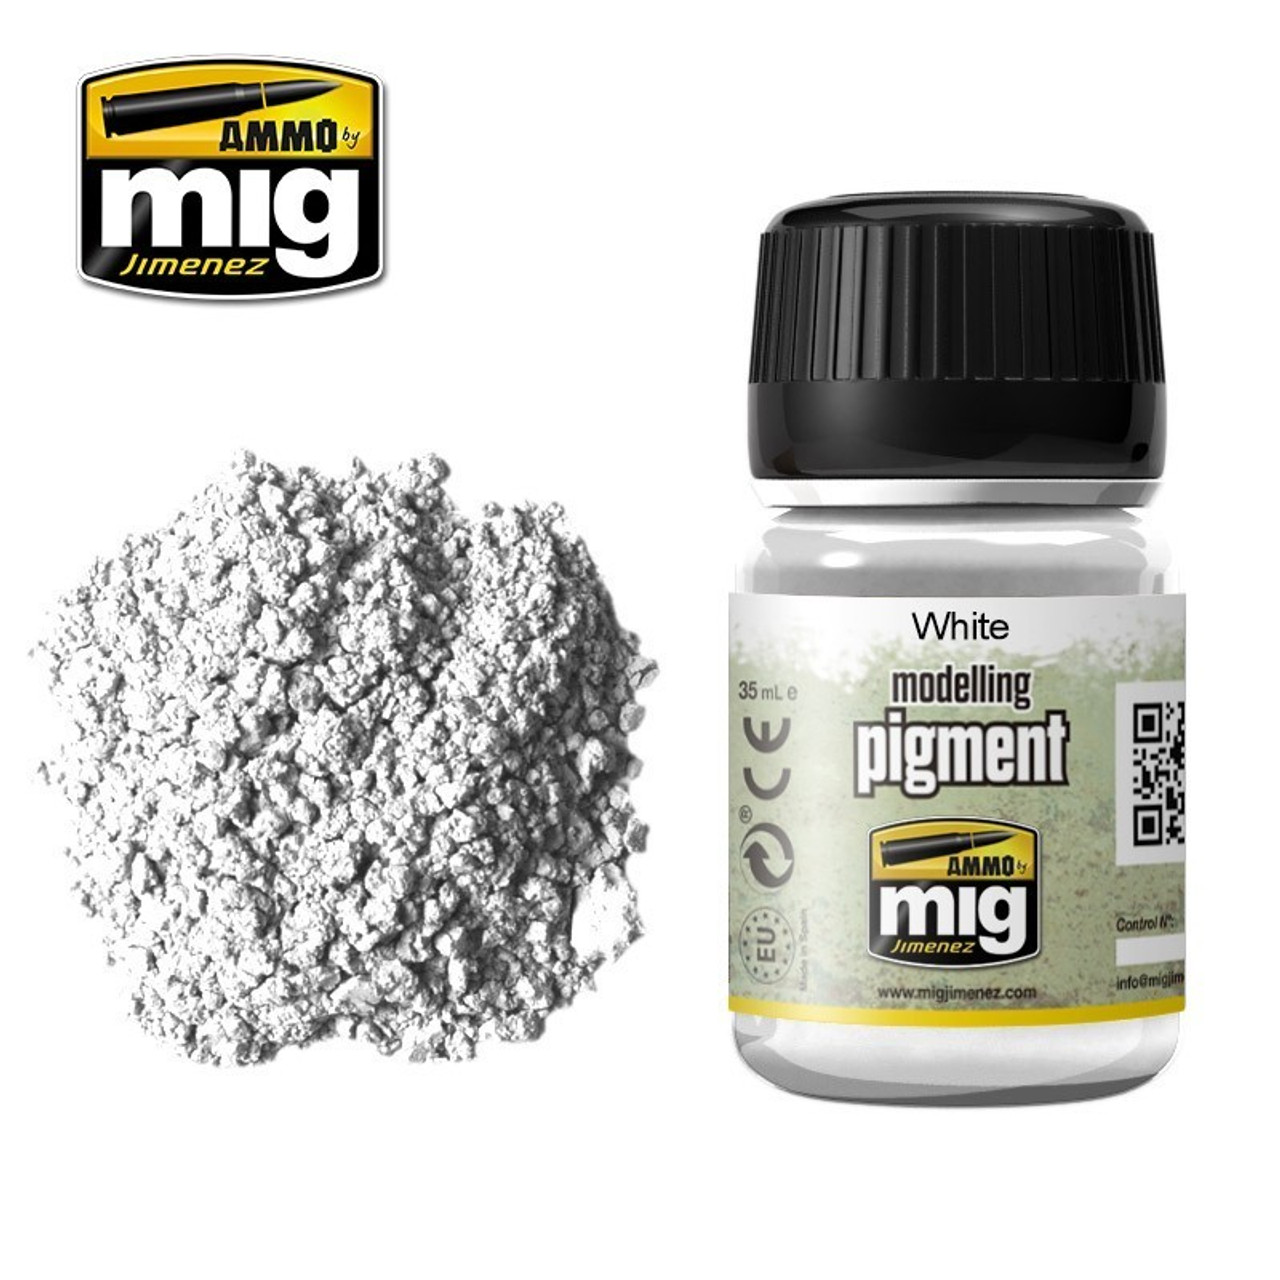 (SO) AMM3016 AMMO by Mig Modelling Pigment - White